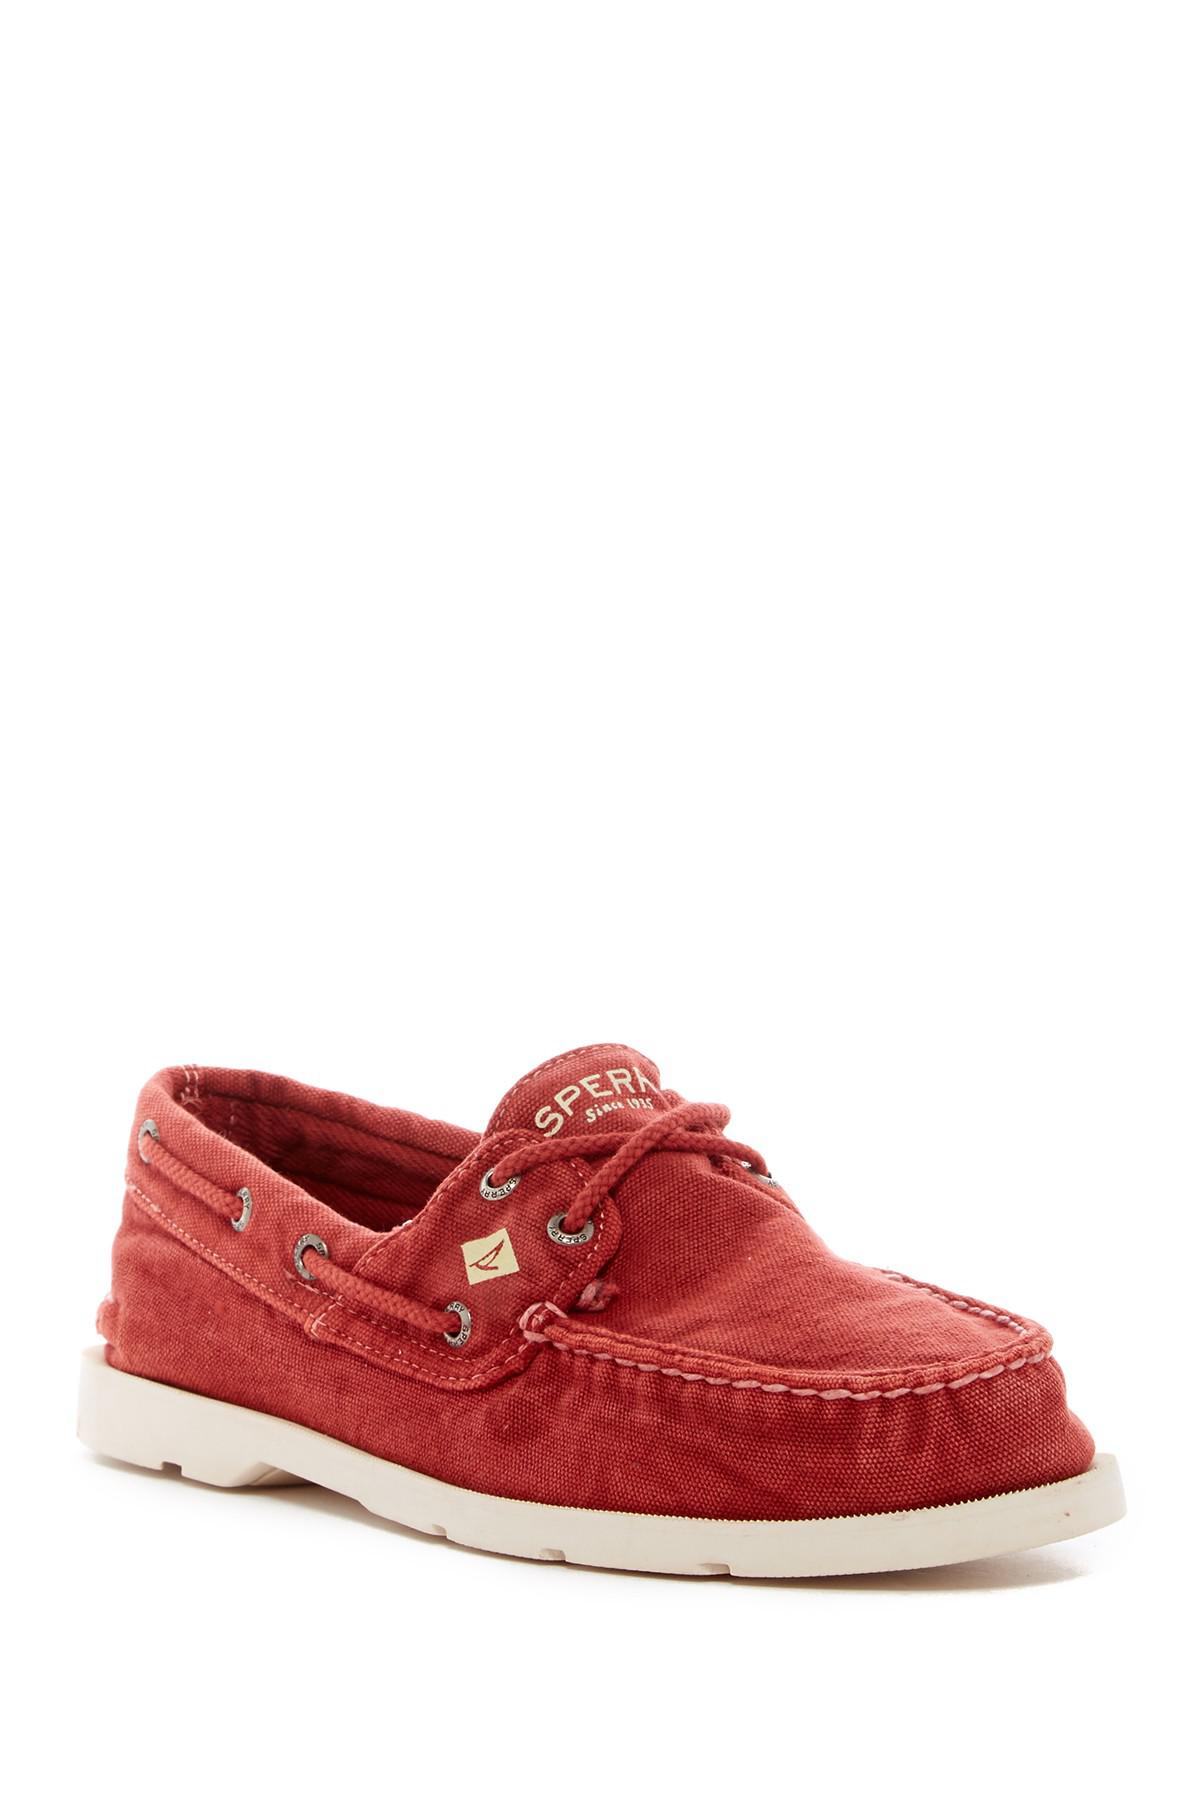 Lyst - Sperry Top-Sider Leeward Washed Canvas Boat Shoe in ...